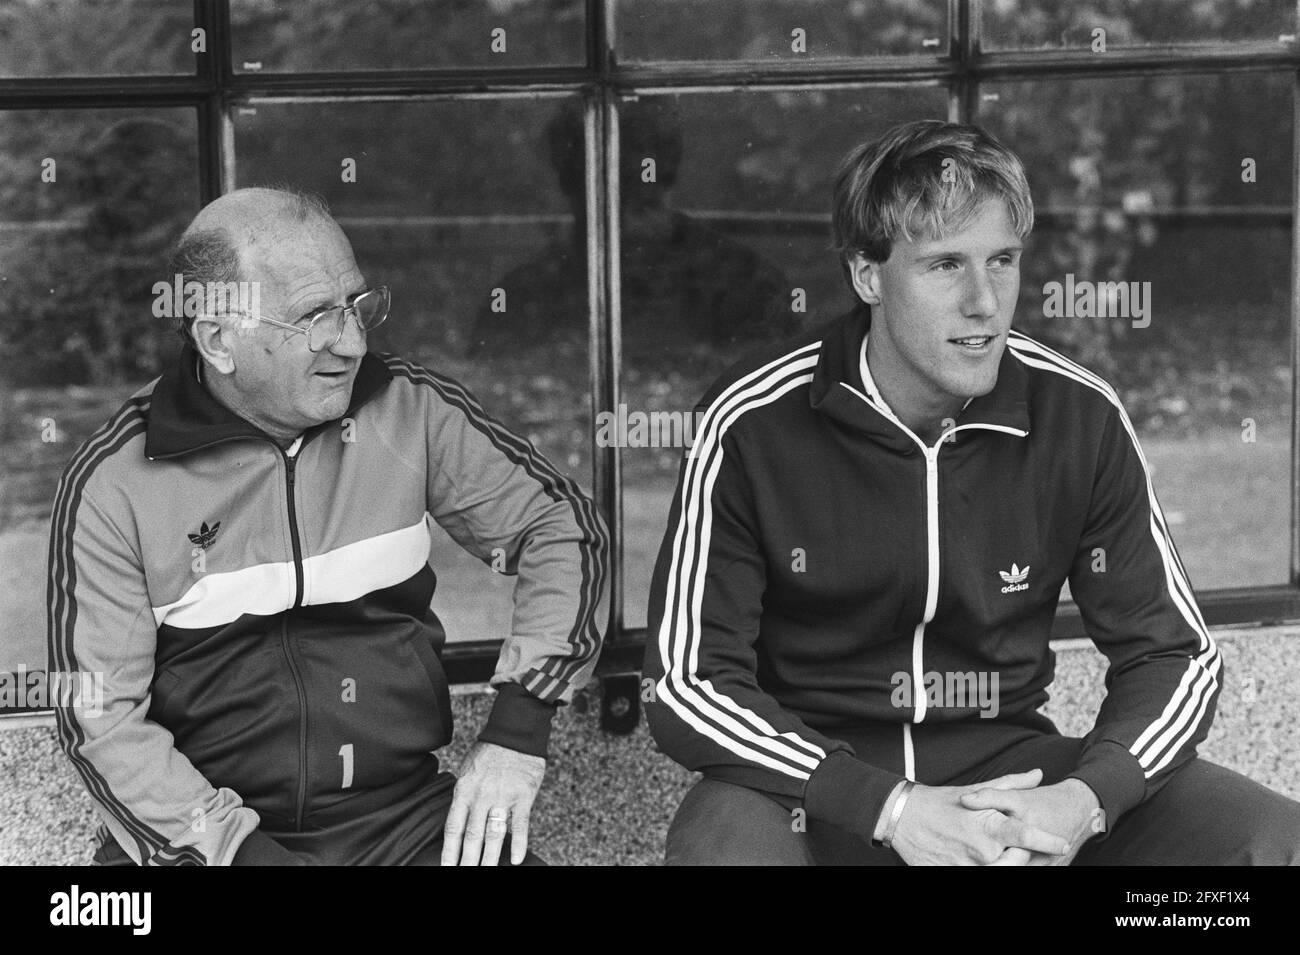 Training Dutch national team in Zeist; Cees Rijvers and goalkeeper Van Breukelen (r), August 18, 1982, goalkeepers, sports, soccer, The Netherlands, 20th century press agency photo, news to remember, documentary, historic photography 1945-1990, visual stories, human history of the Twentieth Century, capturing moments in time Stock Photo